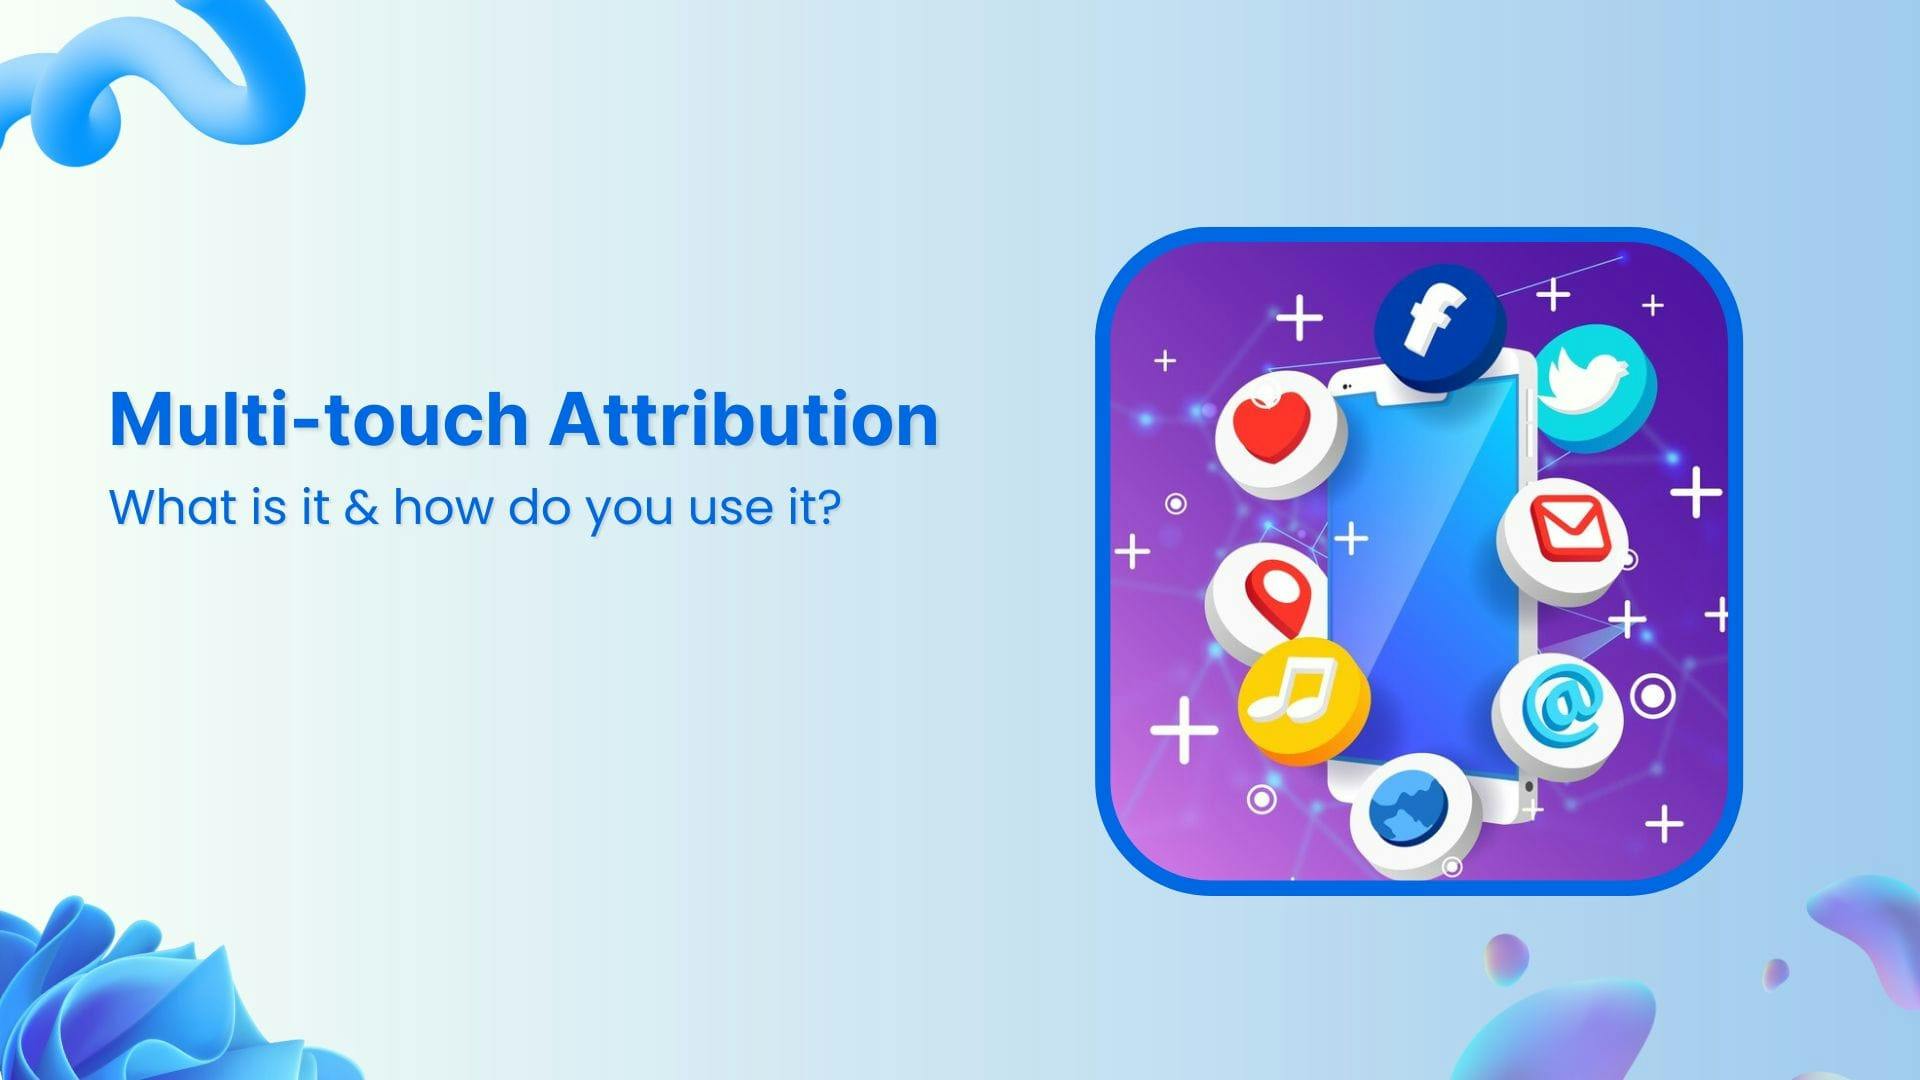 Multi-touch attribution